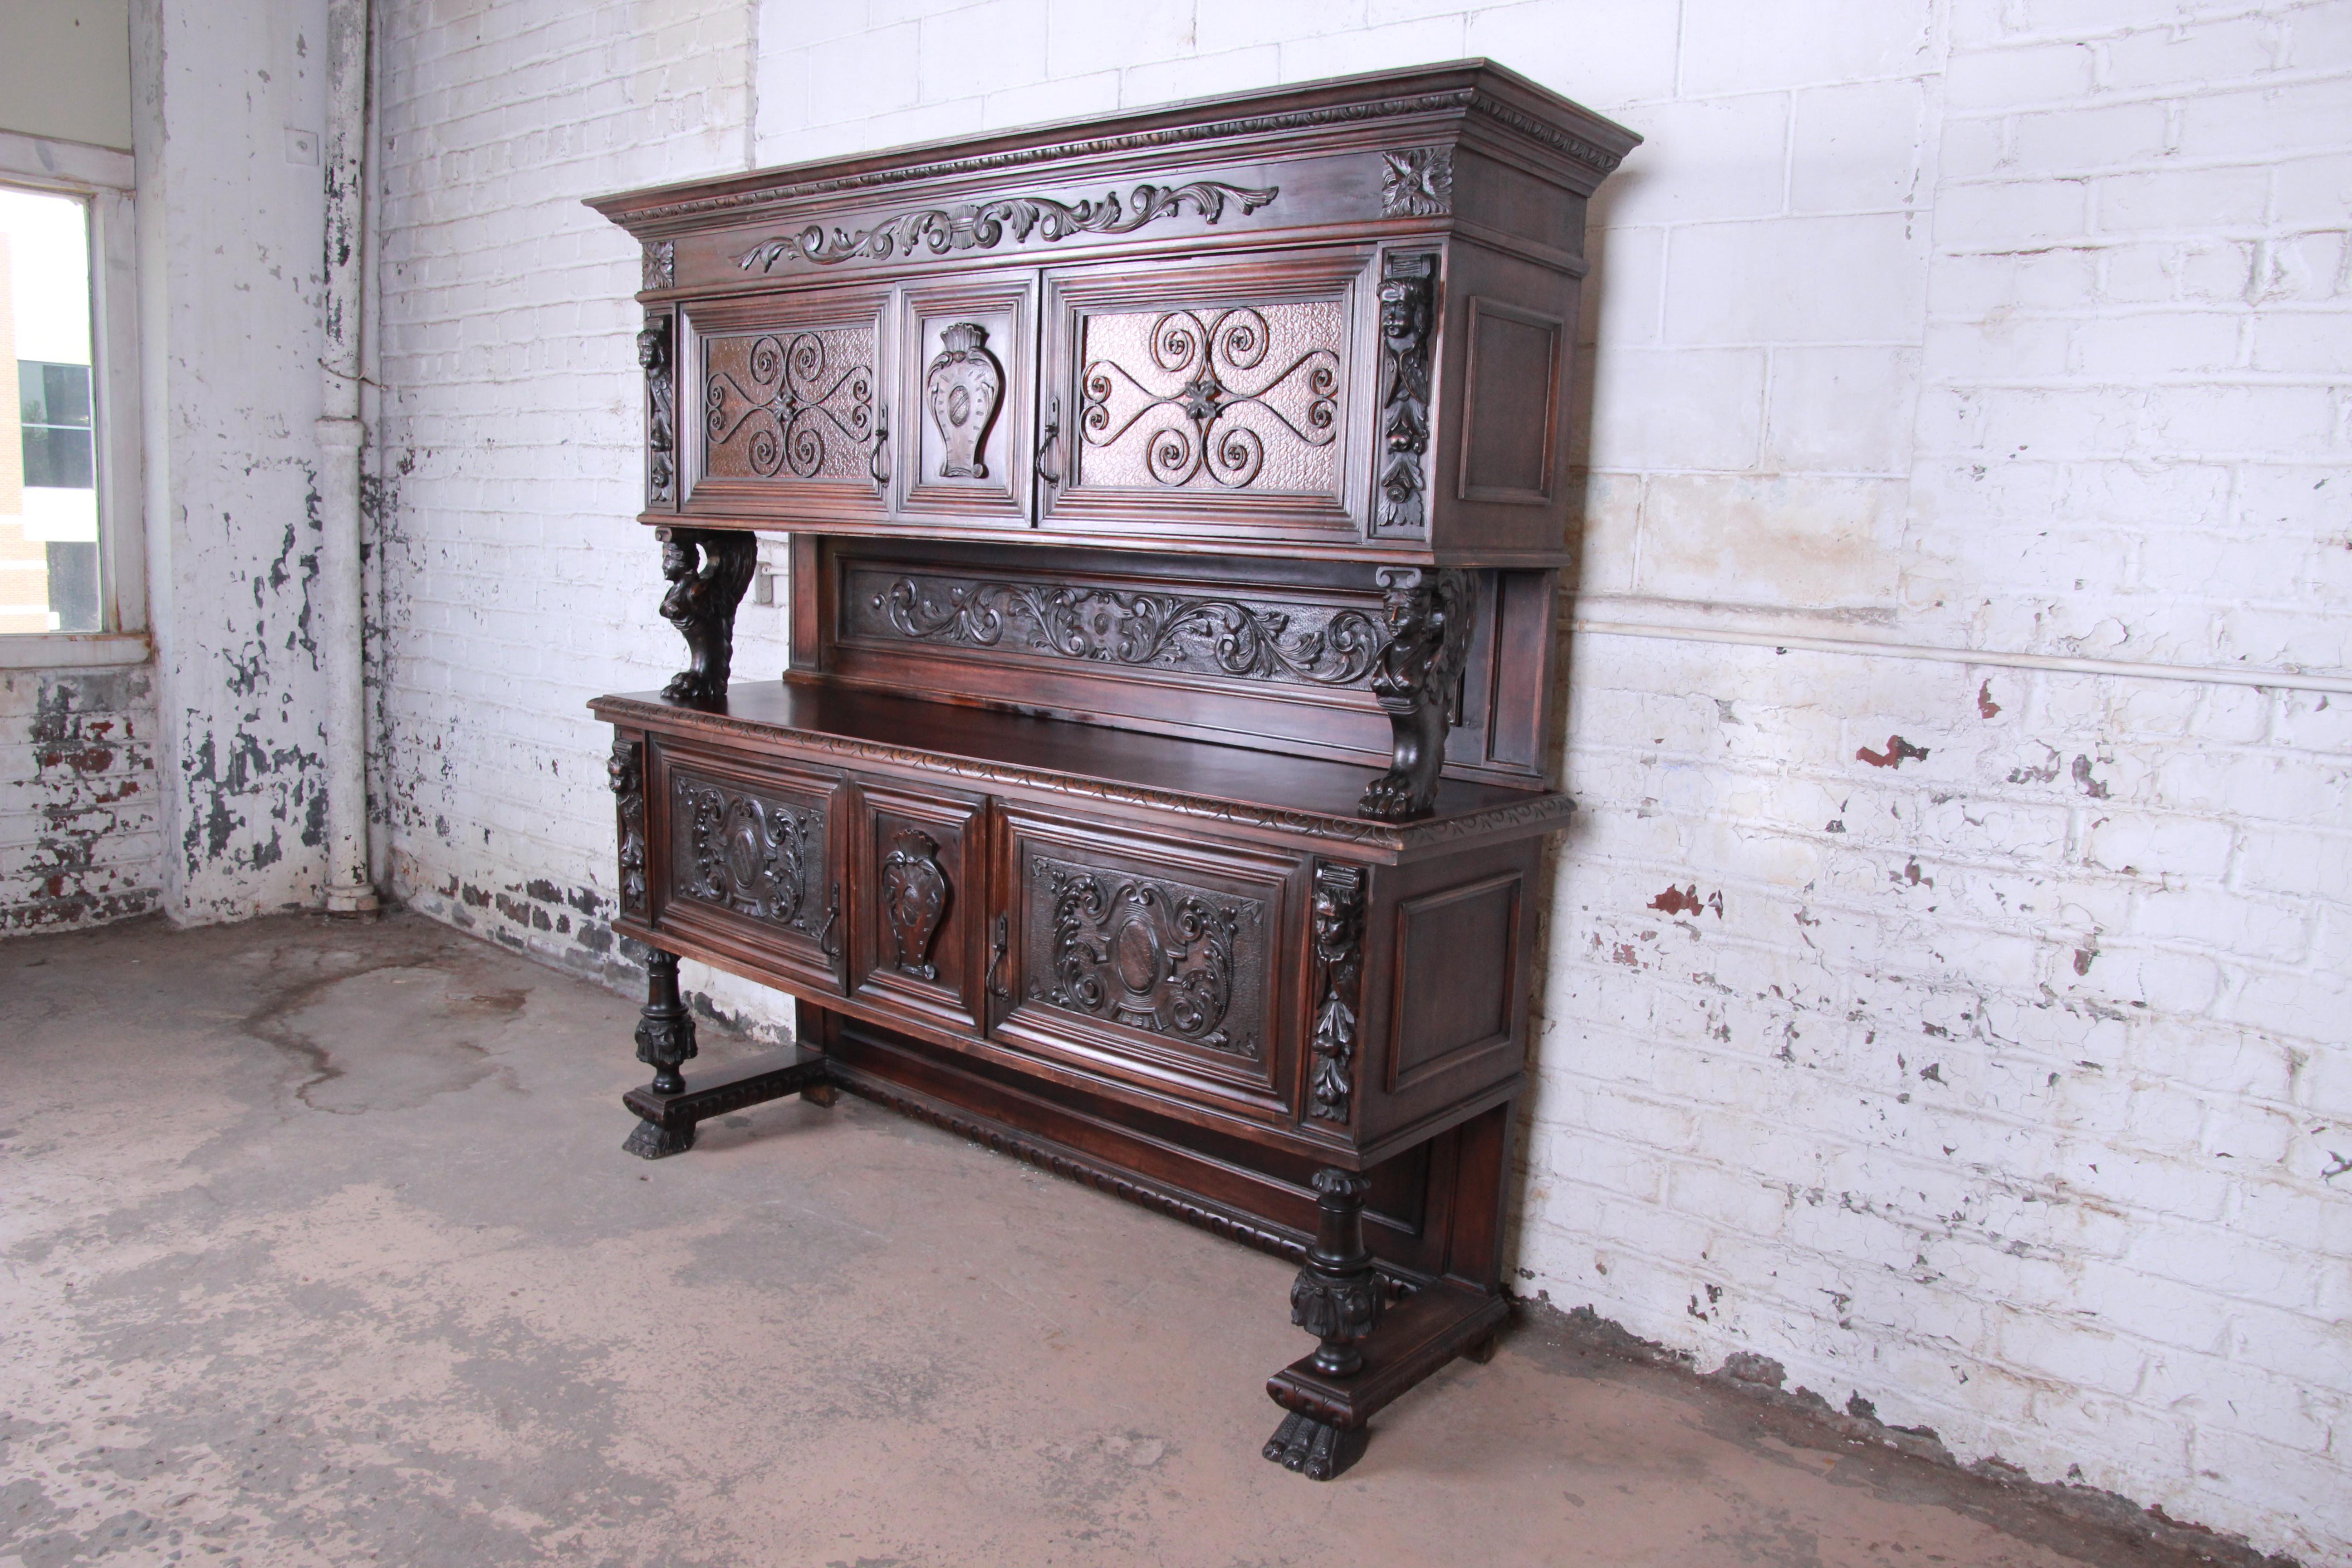 An outstanding 19th century French ornate carved walnut sideboard or bar cabinet. This outstanding cabinet features solid dark walnut construction with incredible carved wood details. It offers ample storage, with two cabinets behind stained glass